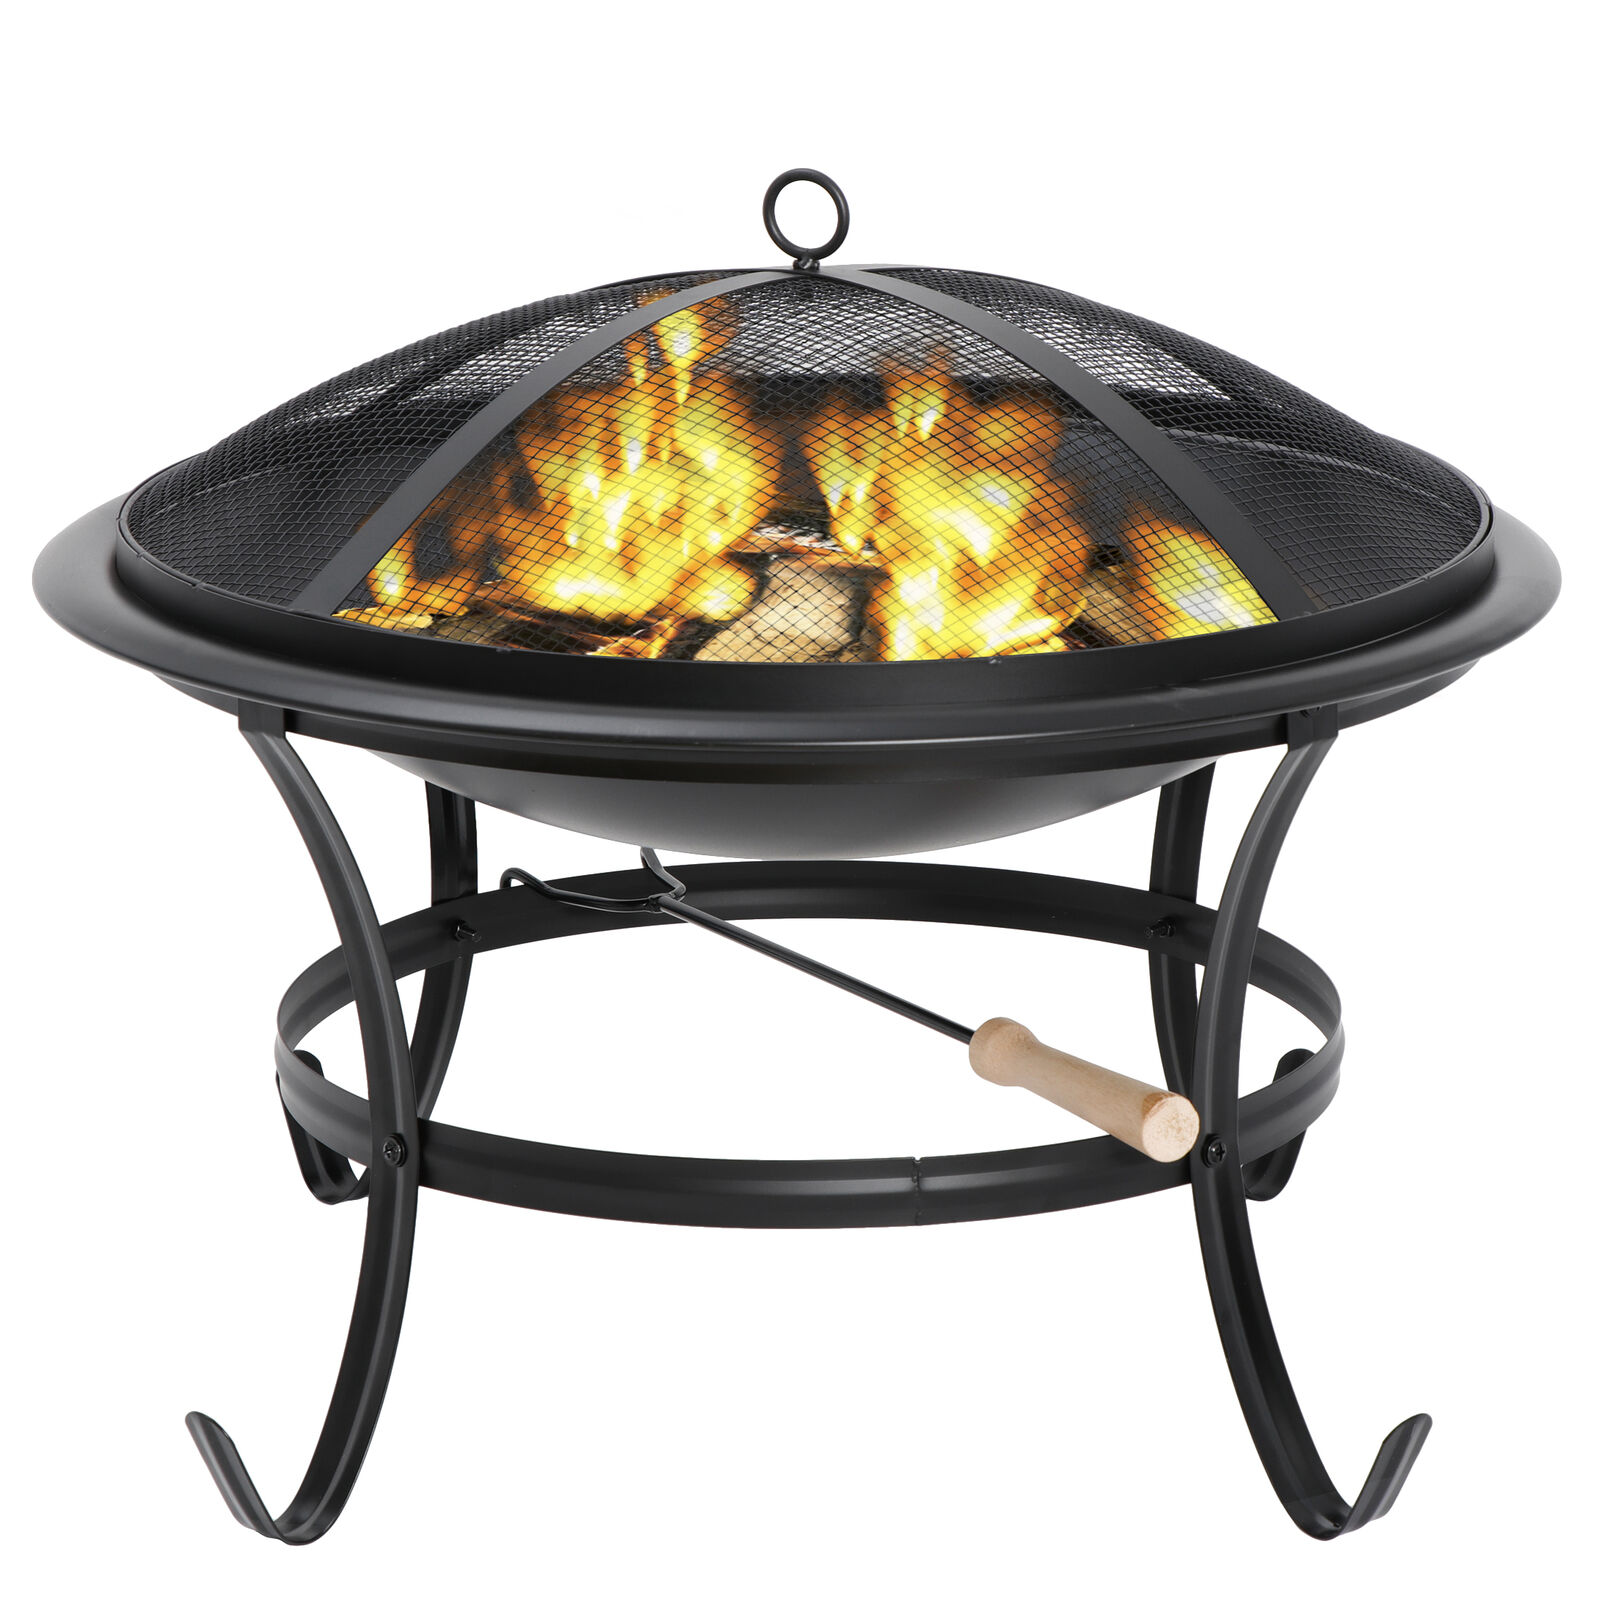 22"Fire Pit Black Steel Portable Wood Burning Mesh Spark Outdoor Stove Fireplace